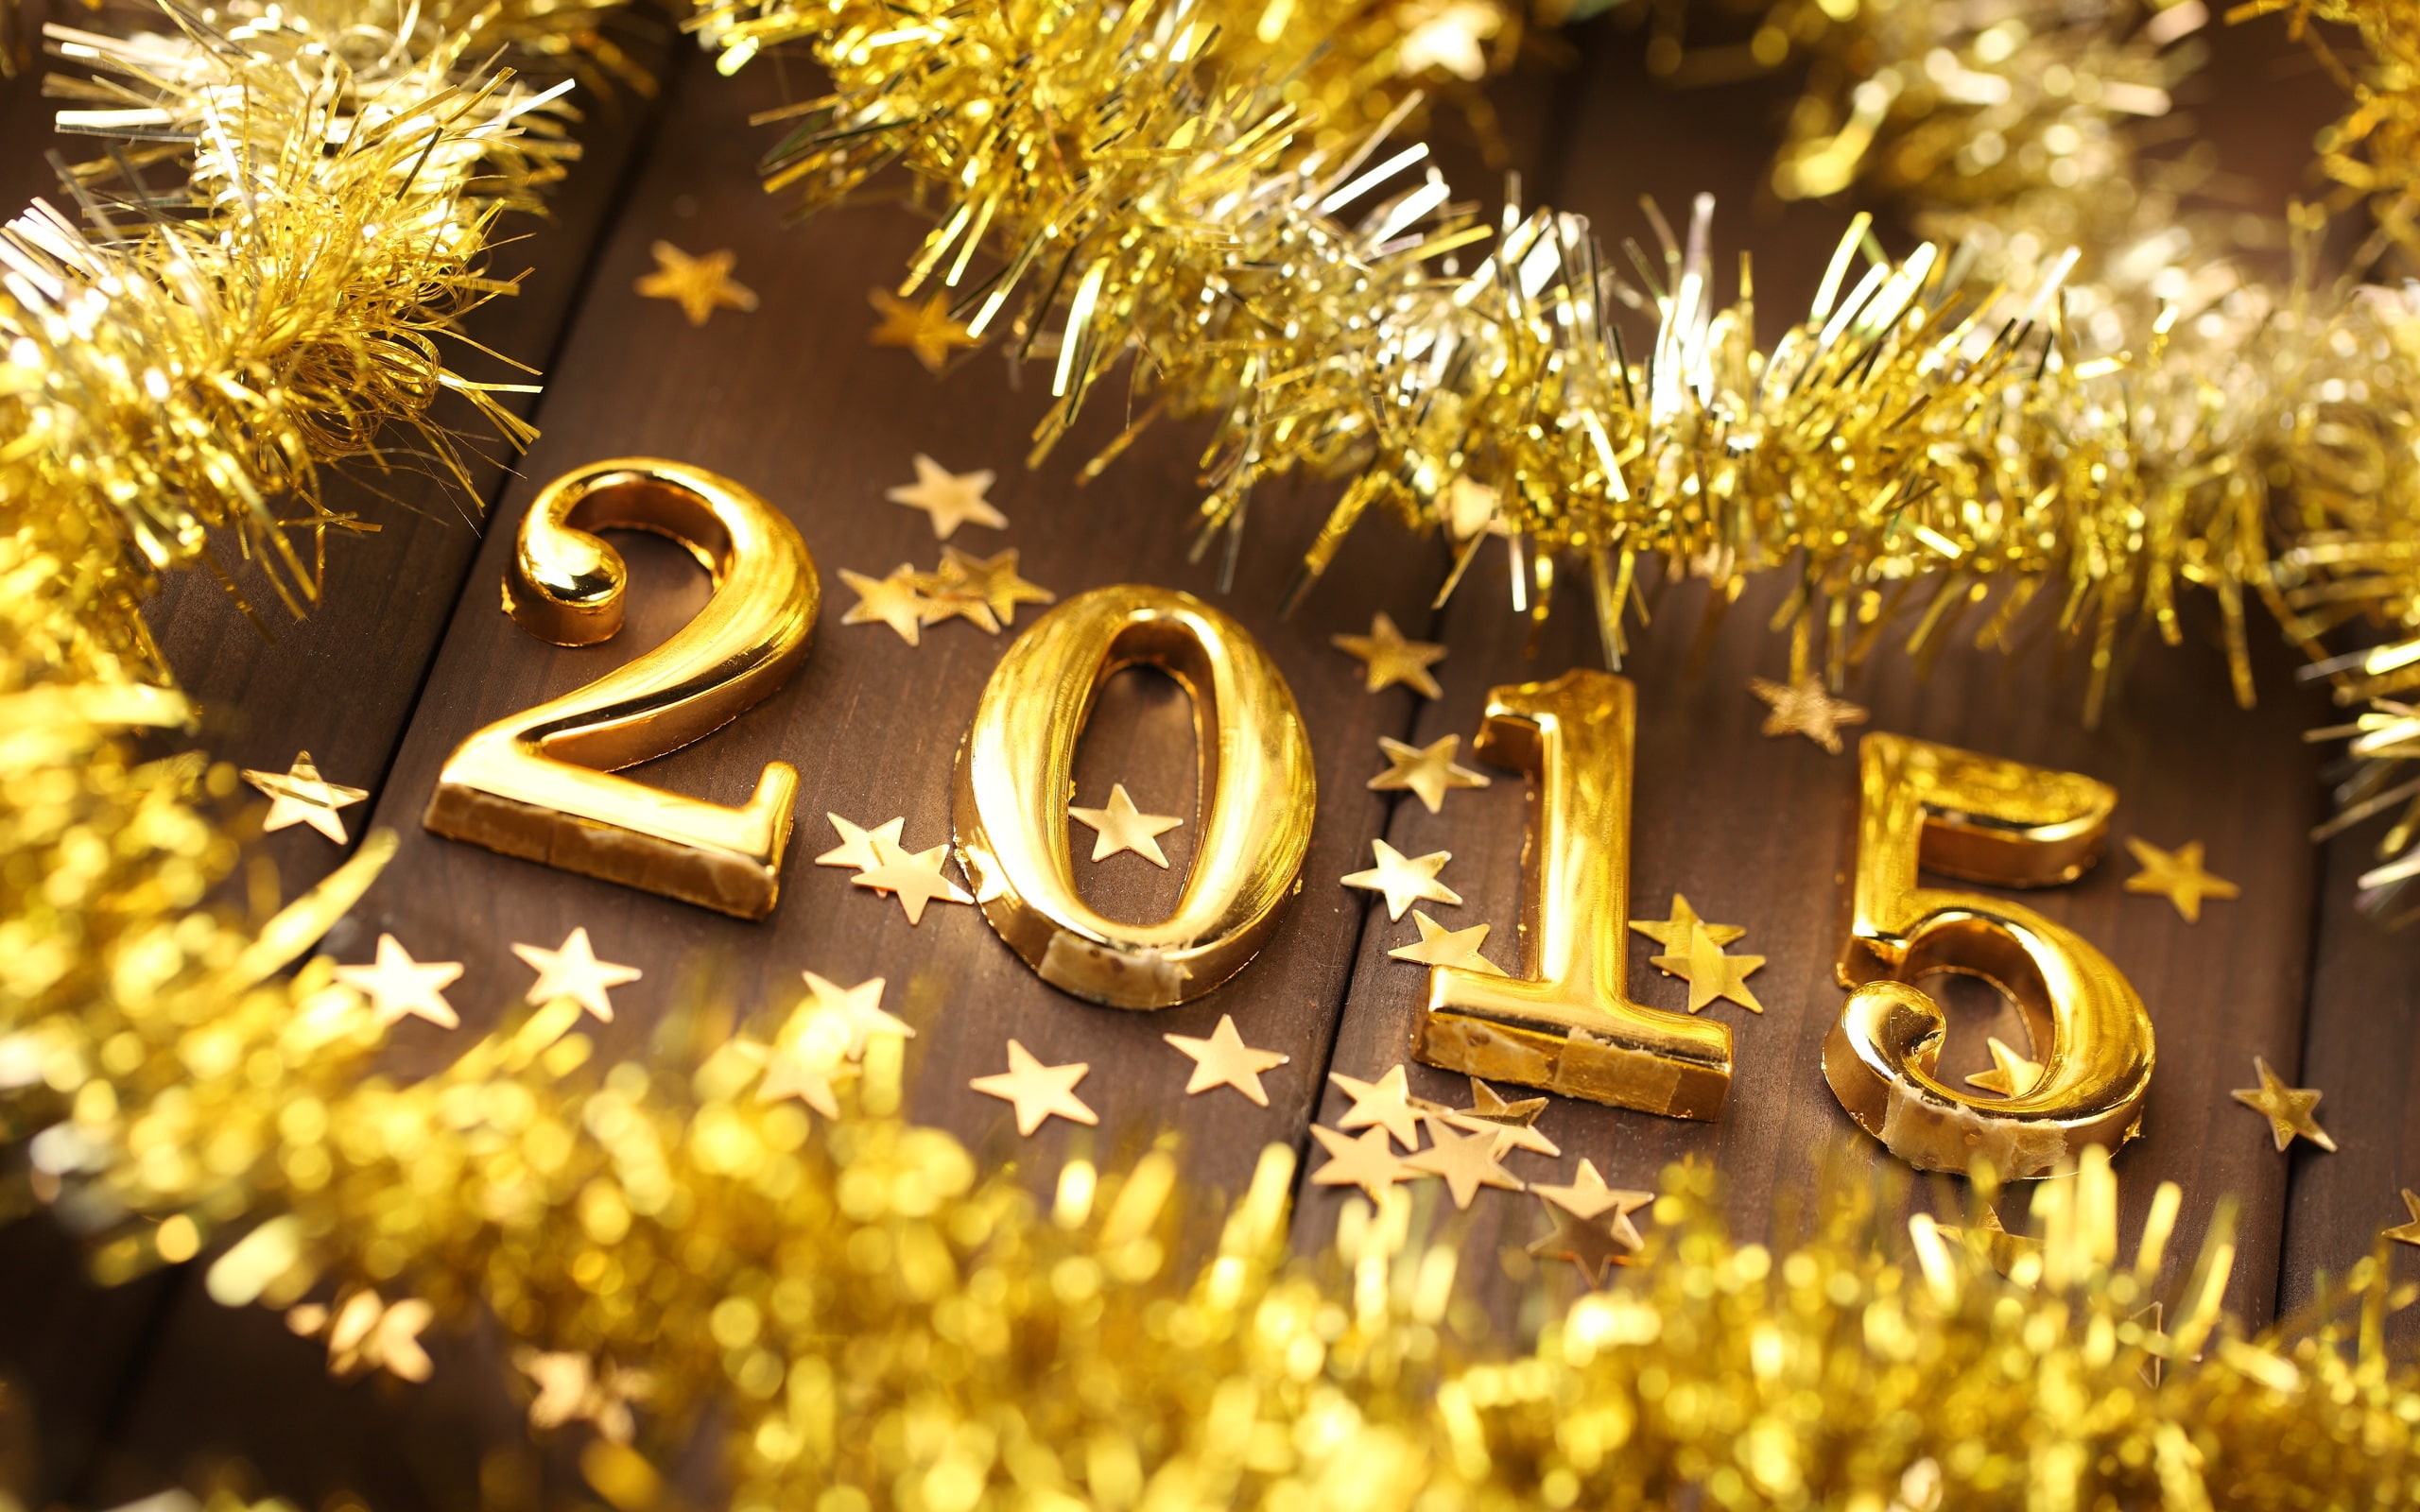 New Year 2015, golden, Christmas, gold-colored 2015 freestanding letter